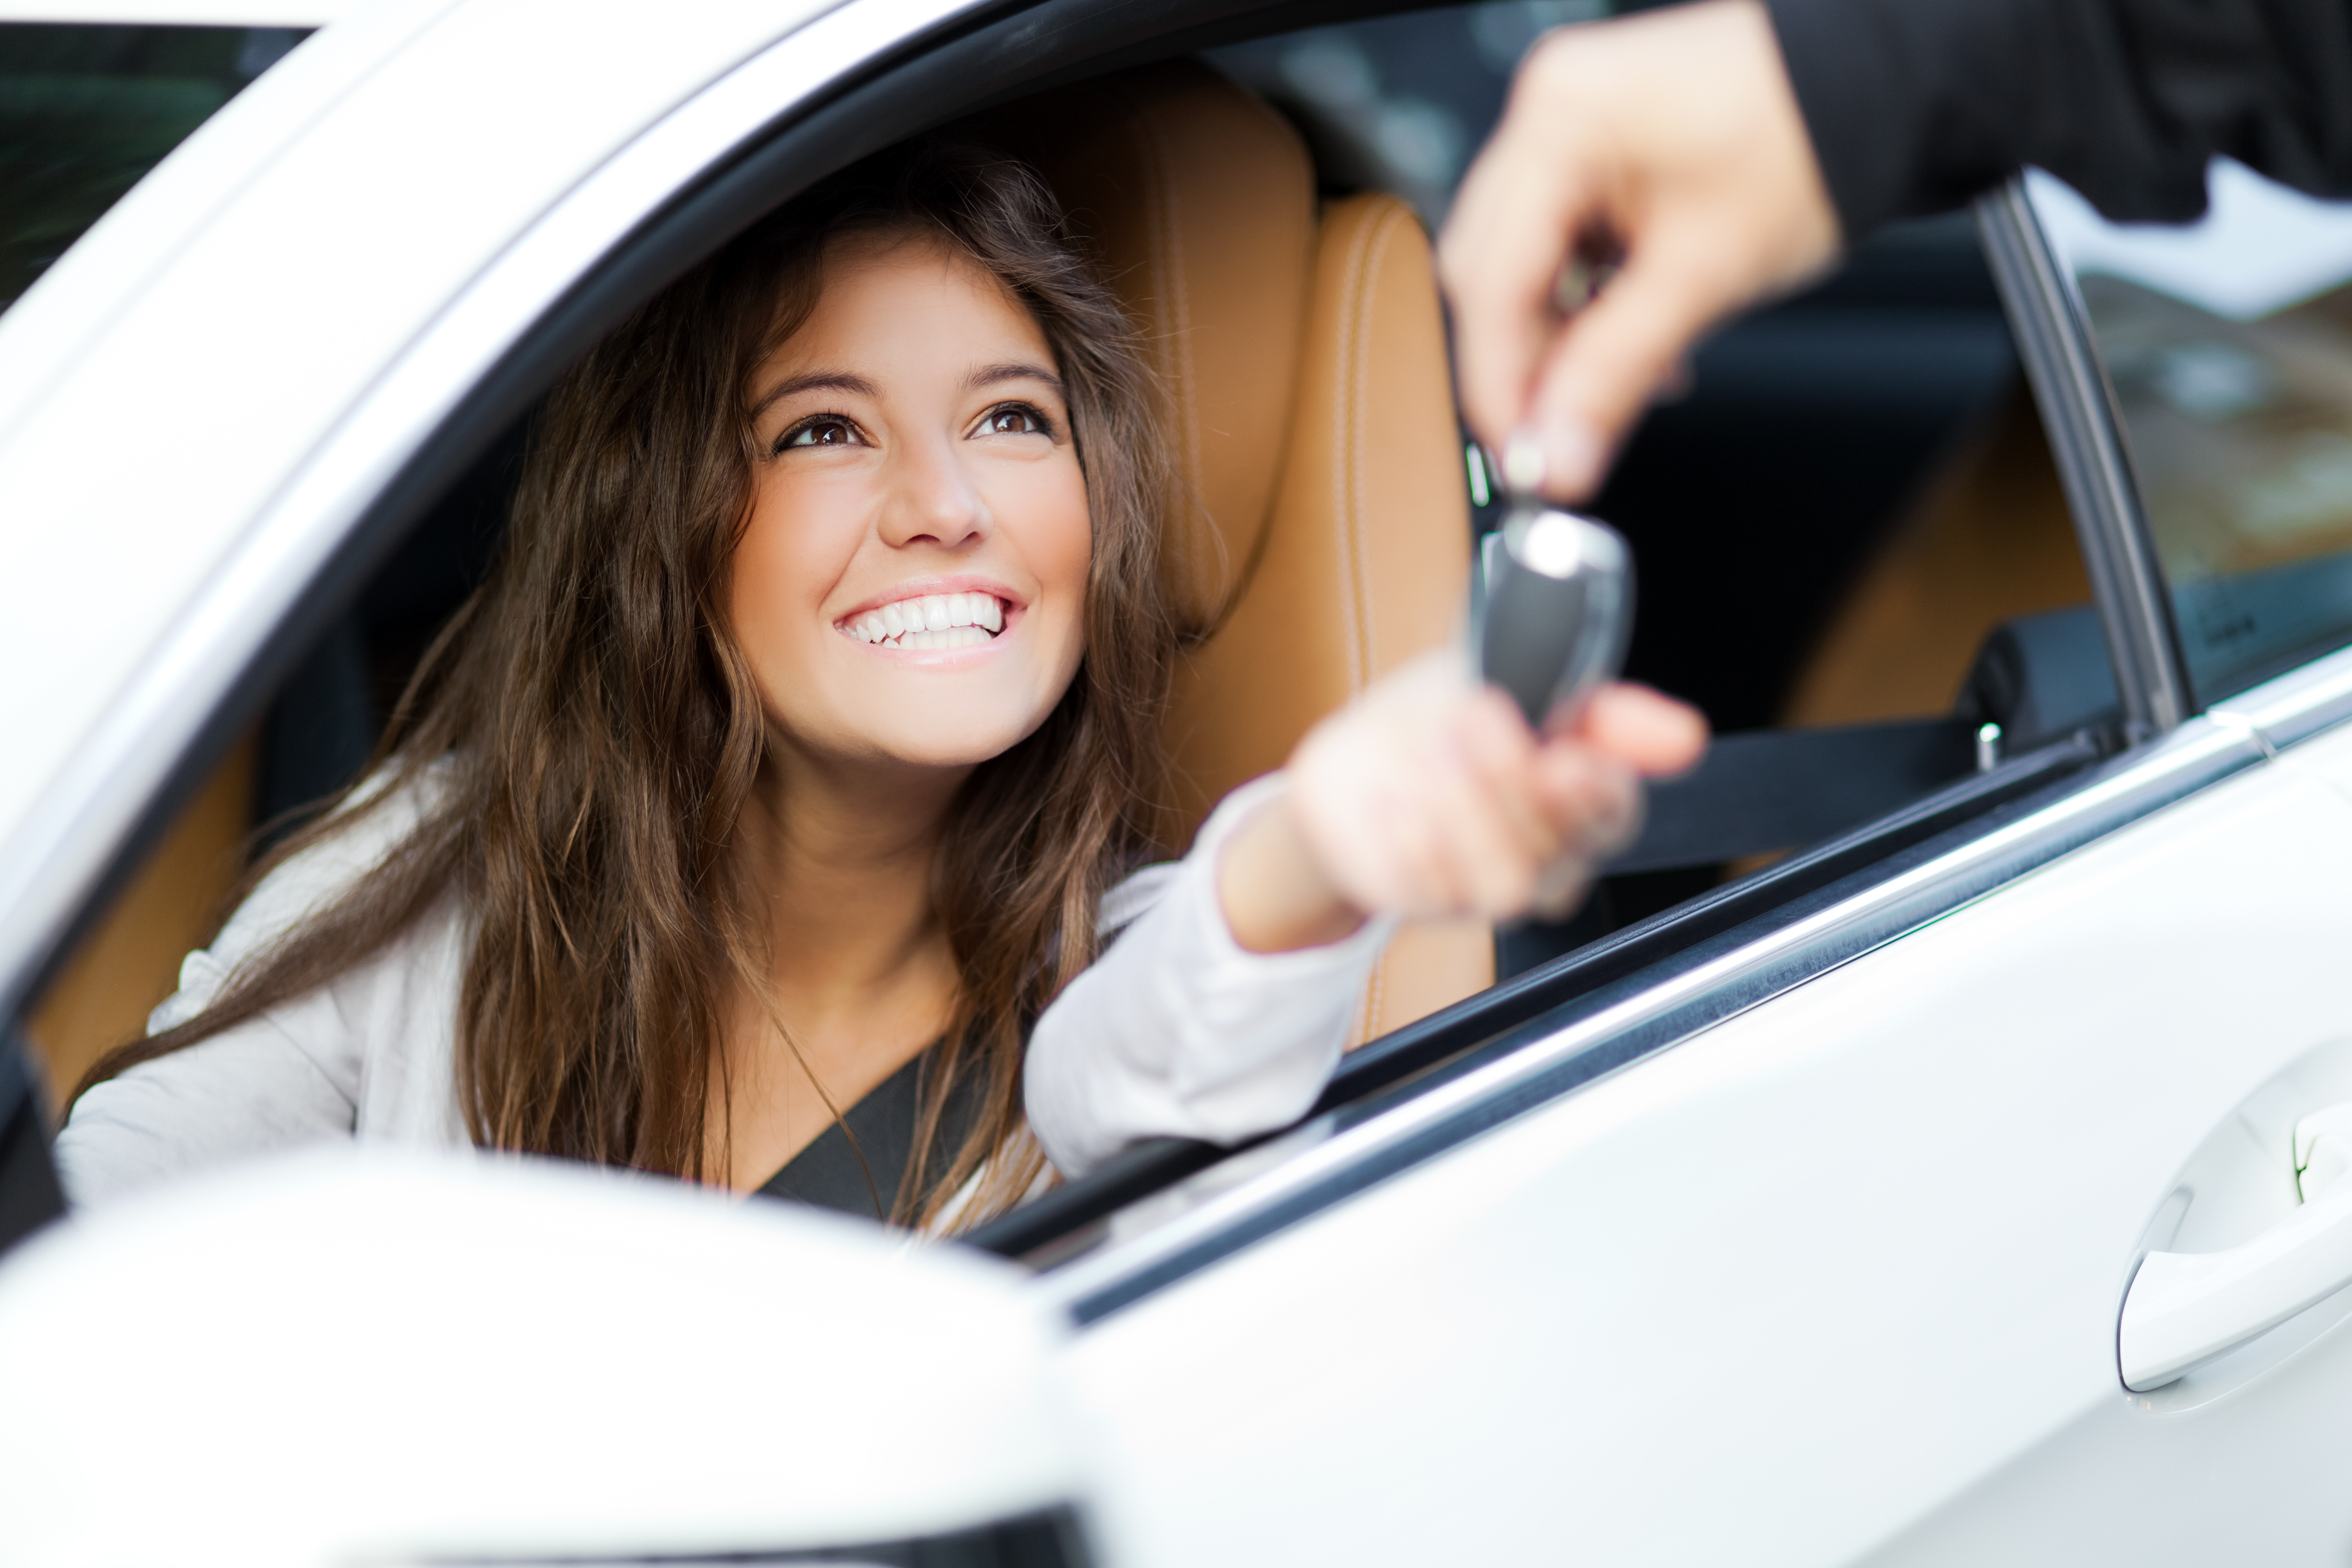 Can a Car Lease & Credit Builder Loan Help Build My Credit?